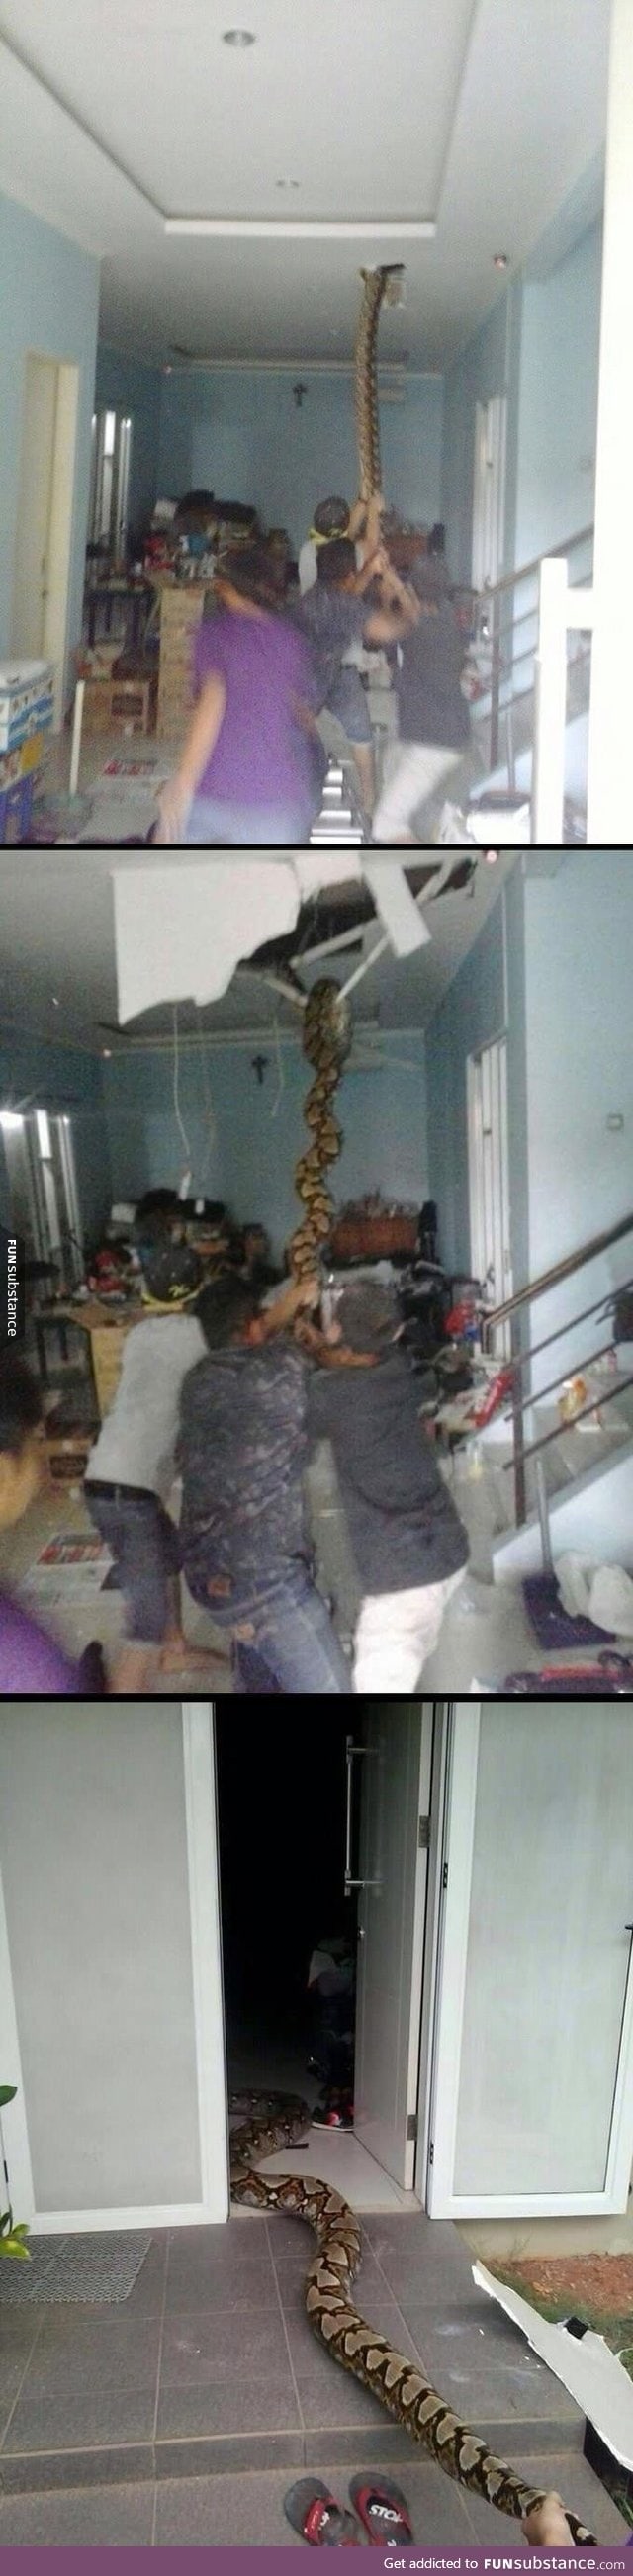 Snake pulled from the ceiling